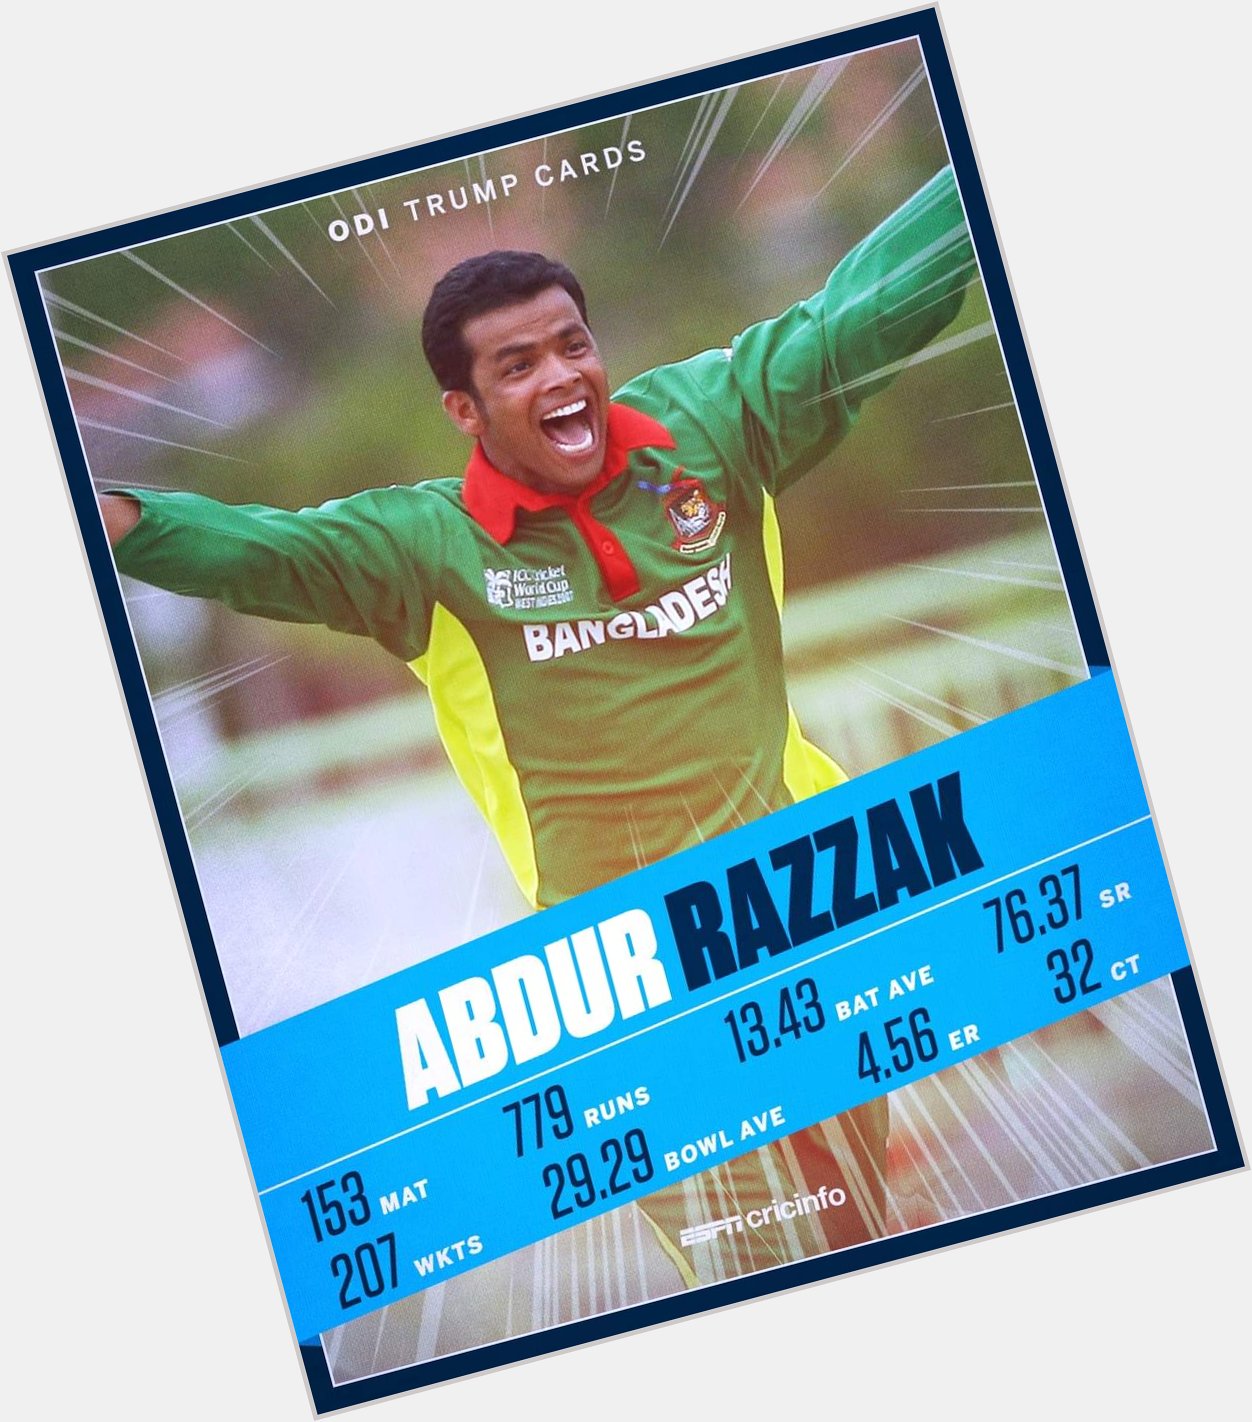 The first to 200 ODI wickets for  ! A happy 39th birthday to Abdur Razzak  